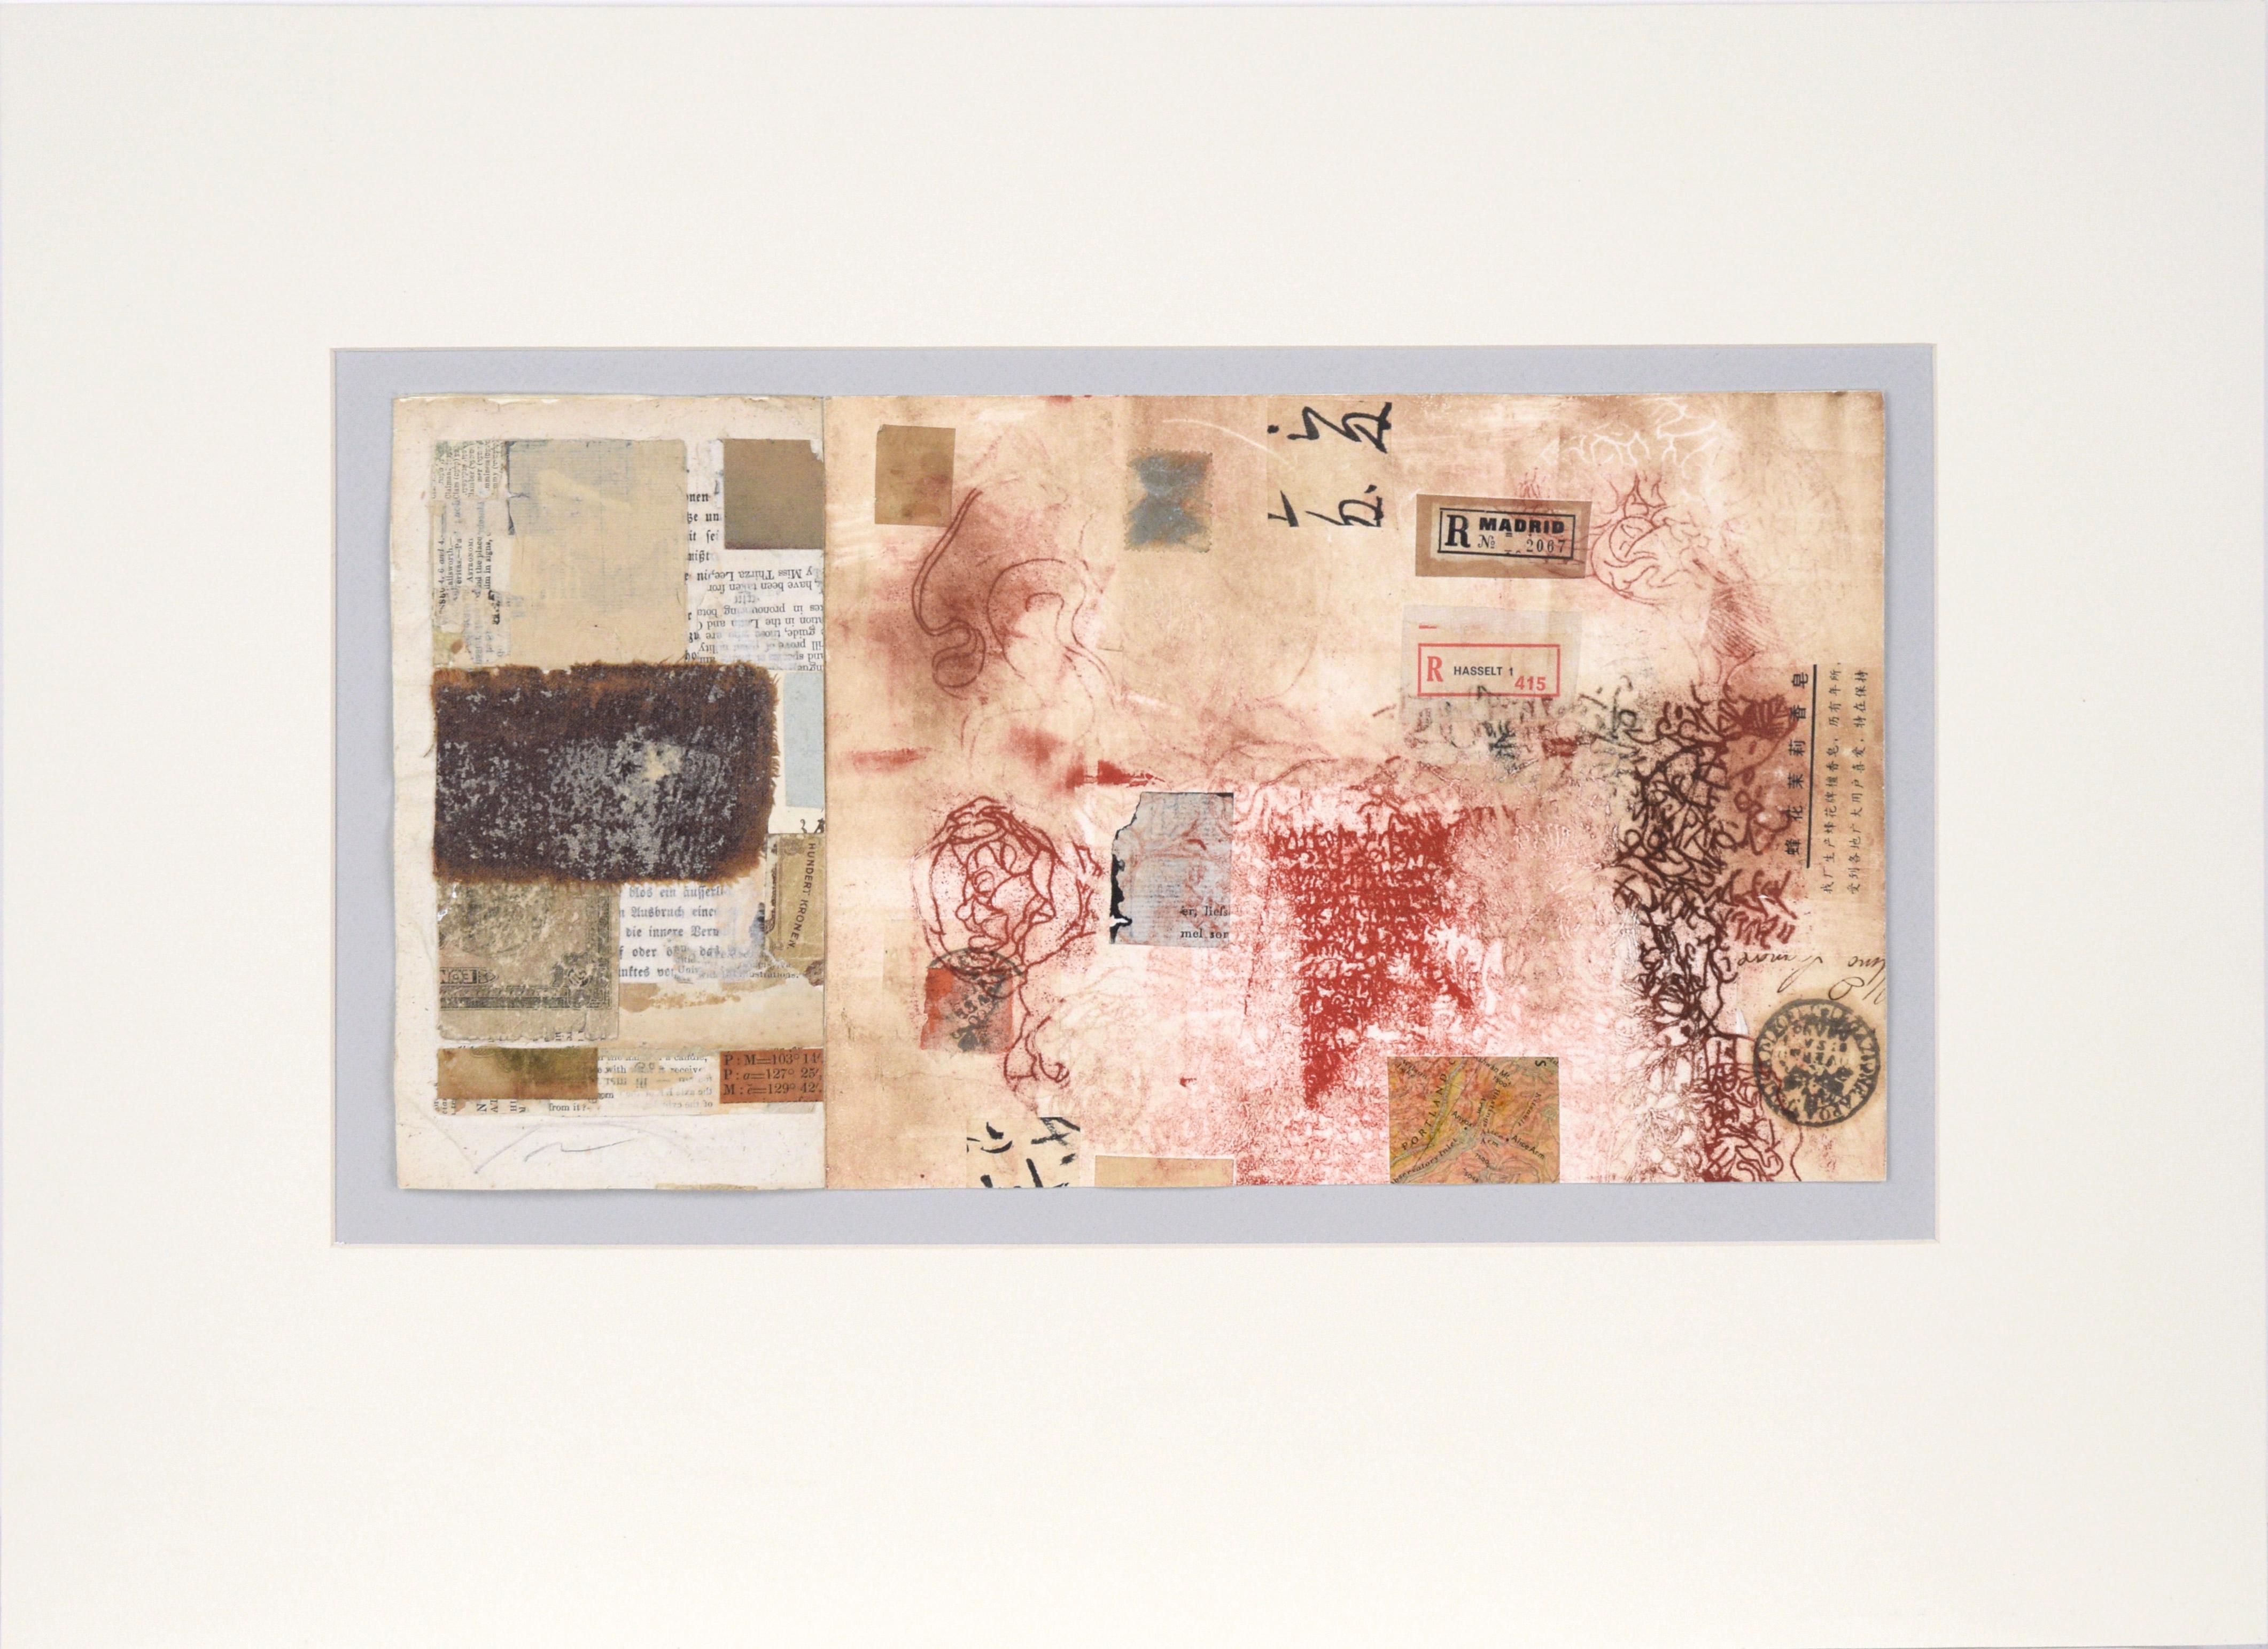 "Anyox" Collage with Chine Colle by Michael Pauker

Small abstract paper collage by Bay Area artist Michael Pauker (American, b. 1957). This piece is created from pieces of antique paper, including maps and labels, assembled in an aesthetically